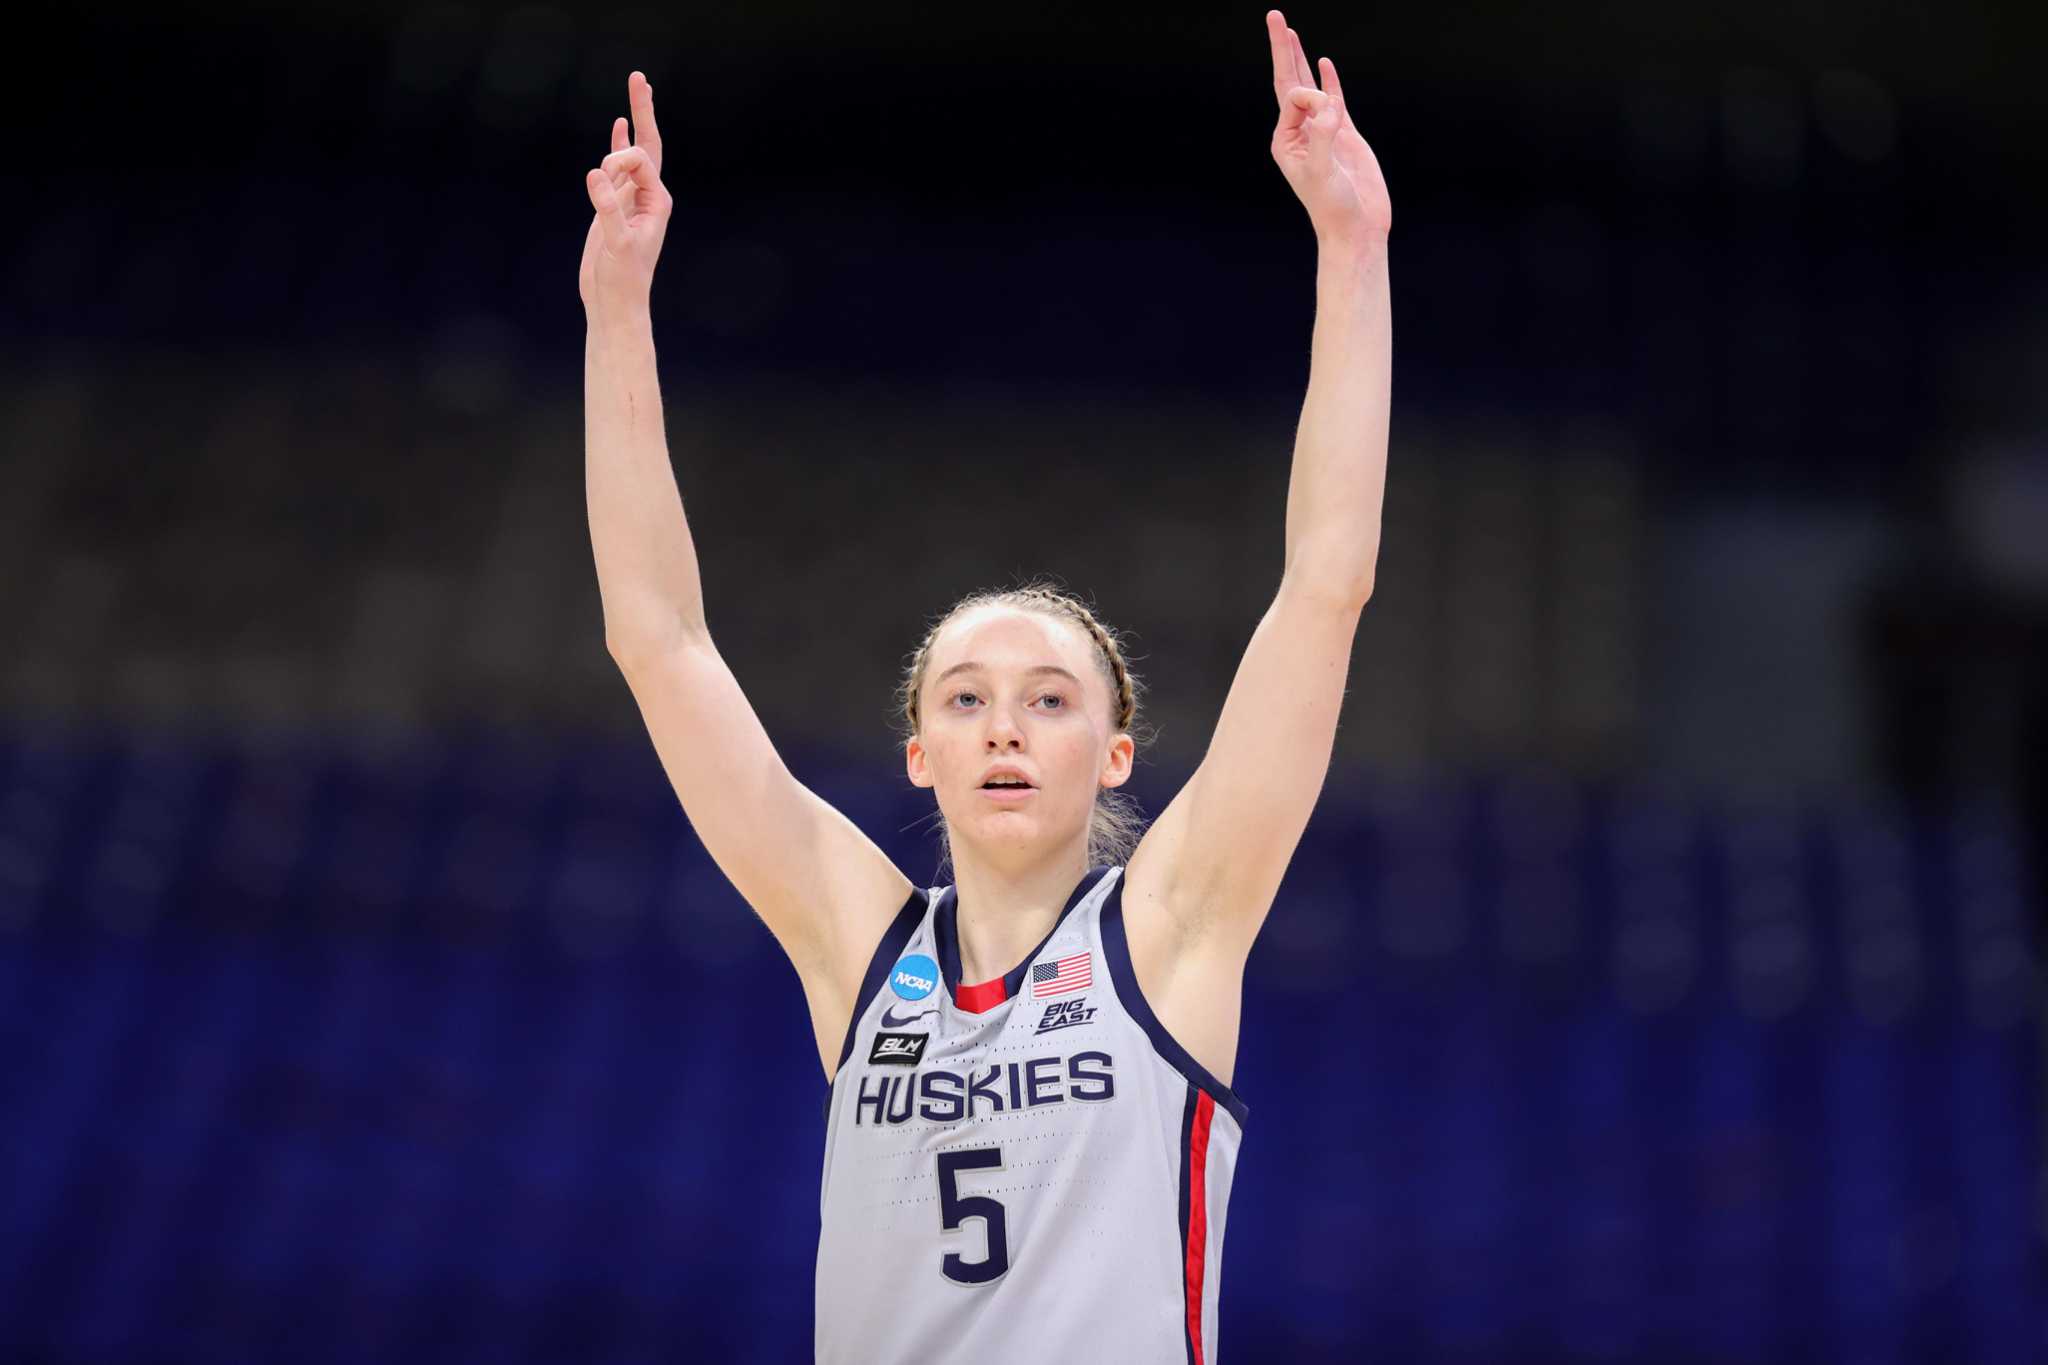 UConn's Paige Bueckers tops NCAA Tournament social media list. Here's